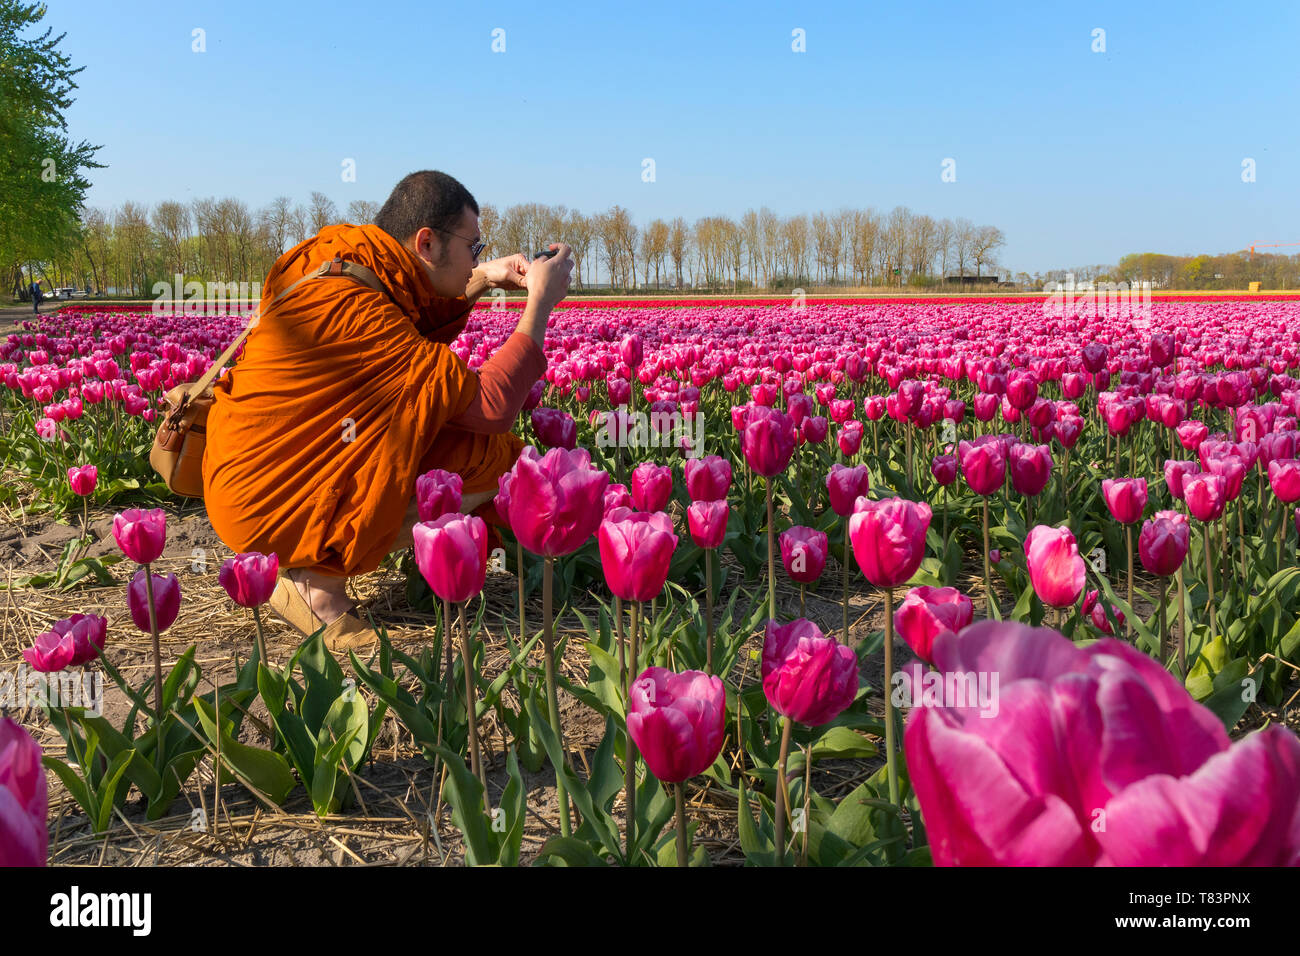 Lisse, Holland - April 18, 2019: Buddhist monk photographing the traditional Dutch tulip fields with rows of pink, red and yellow flowers Stock Photo